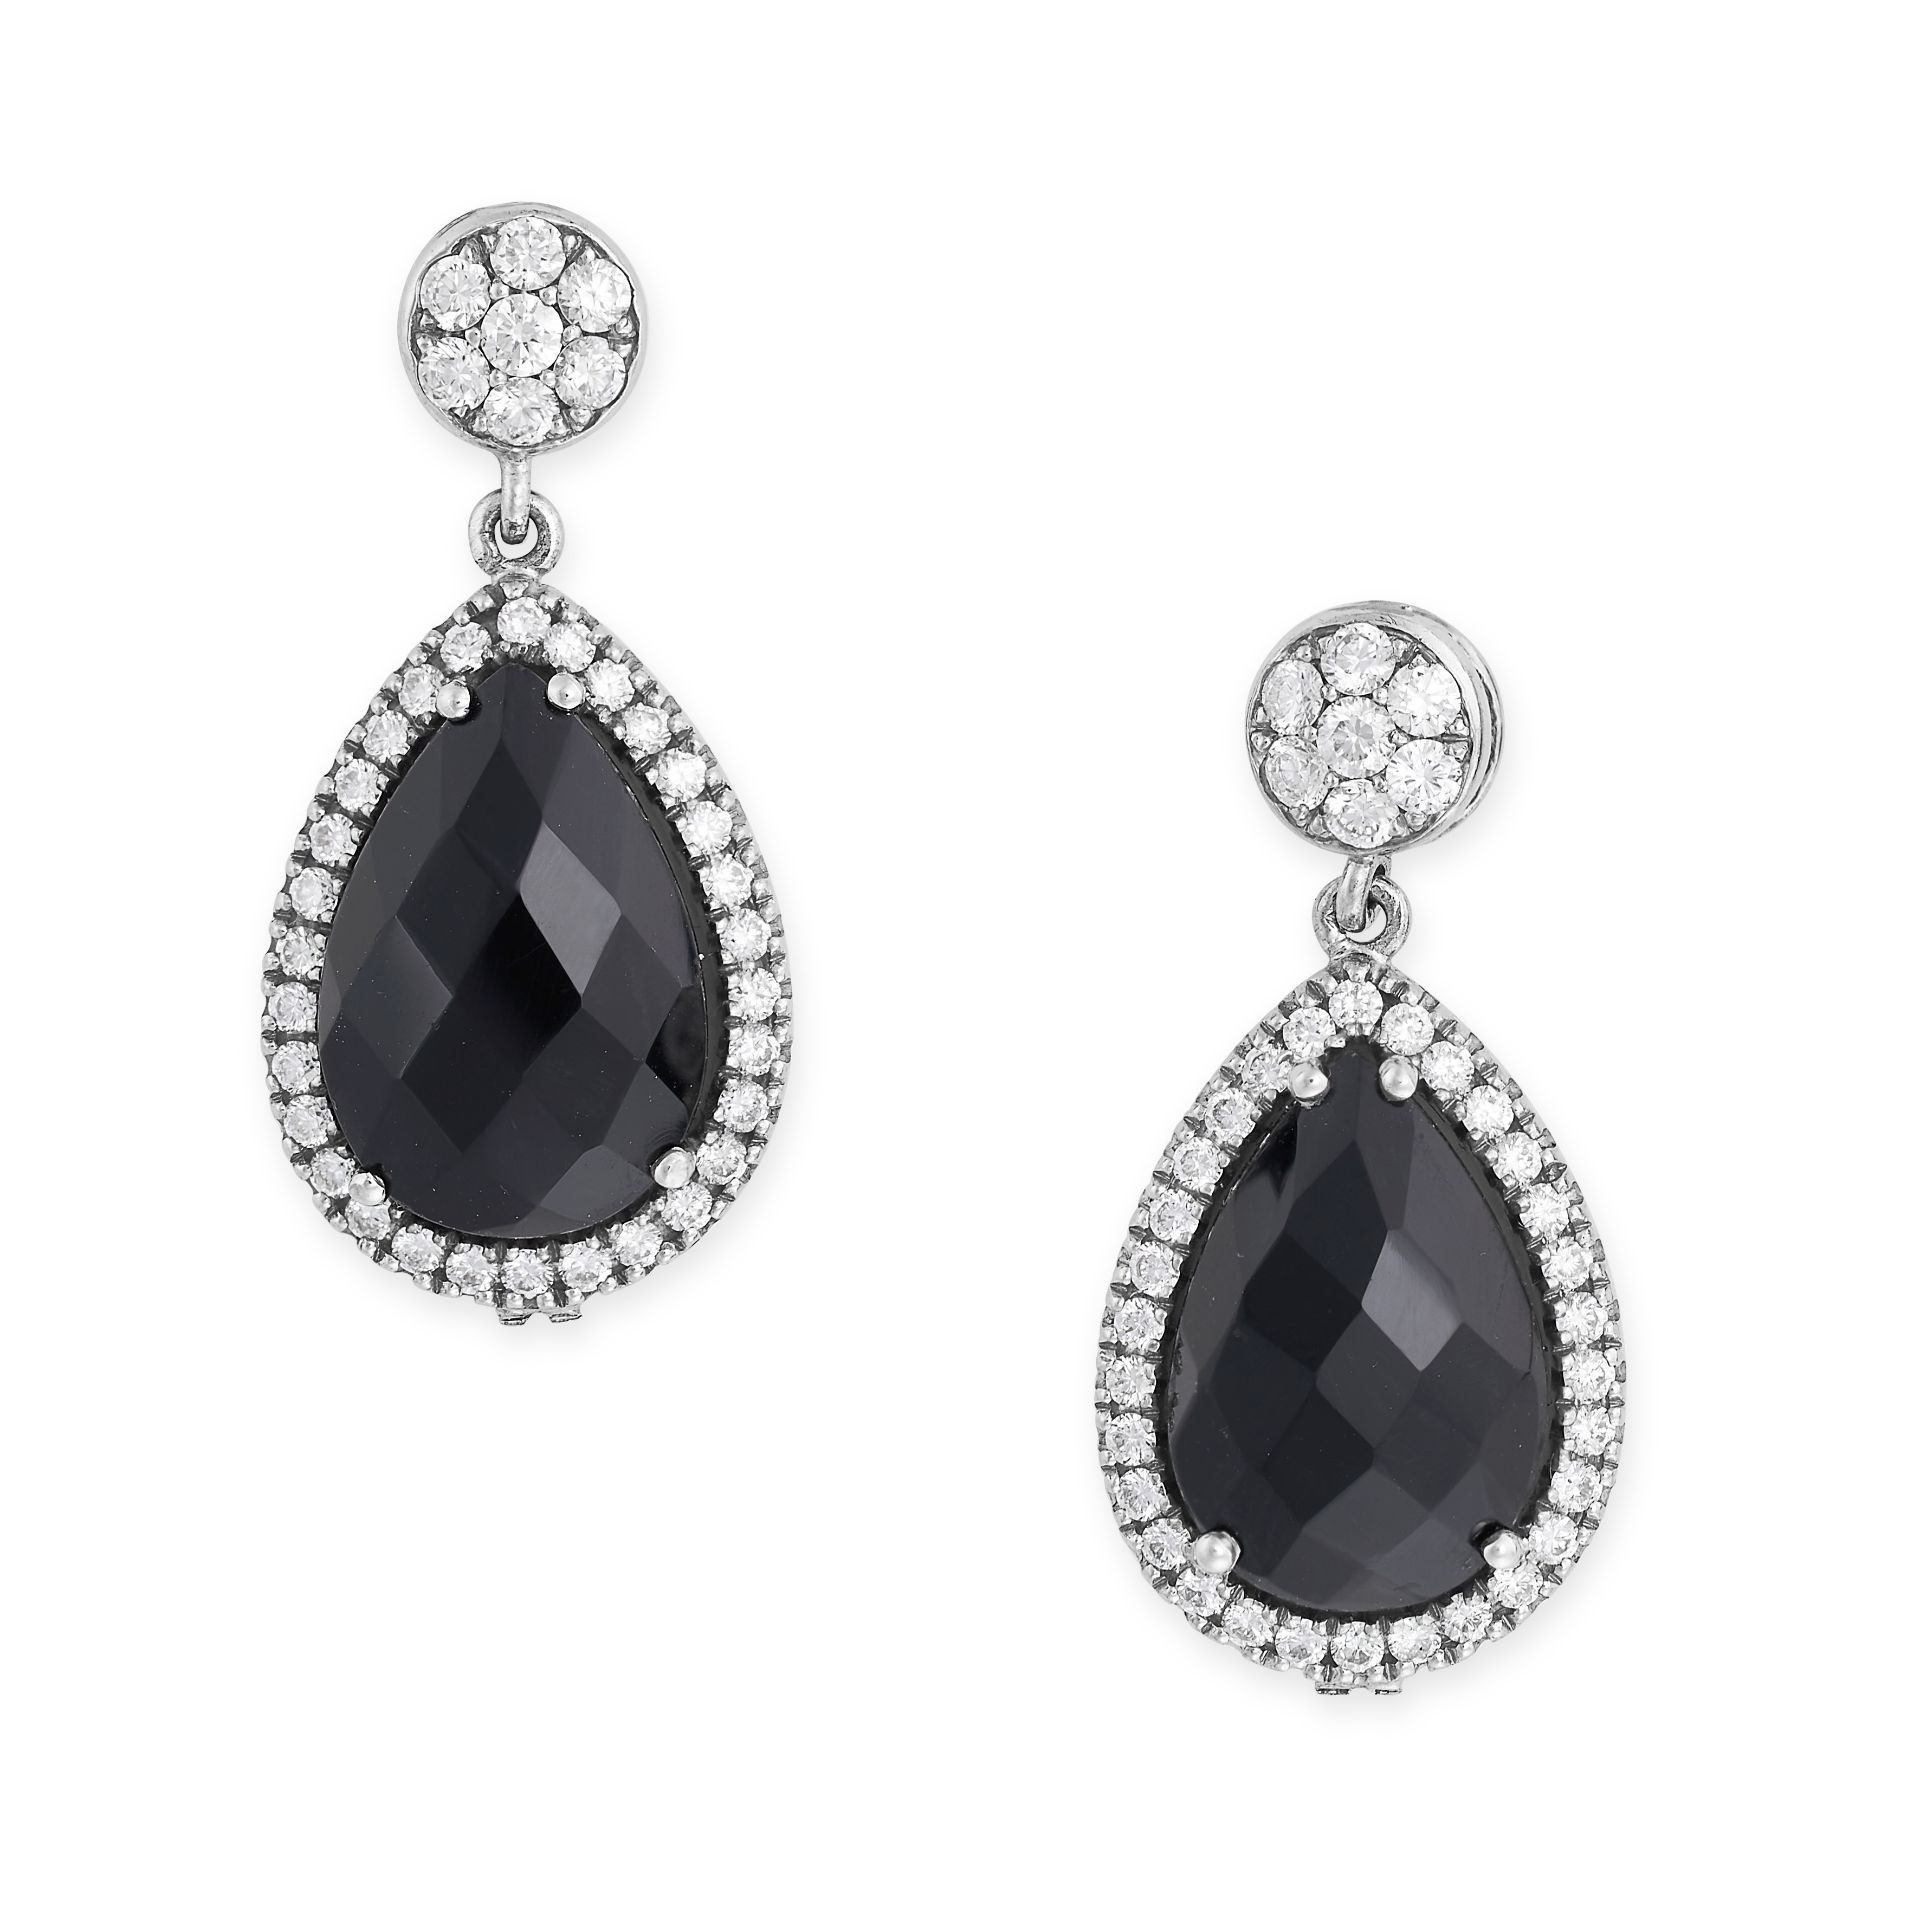 A PAIR OF ONYX AND DIAMOND DROP EARRINGS in white gold, each set with a cluster of round brilliant